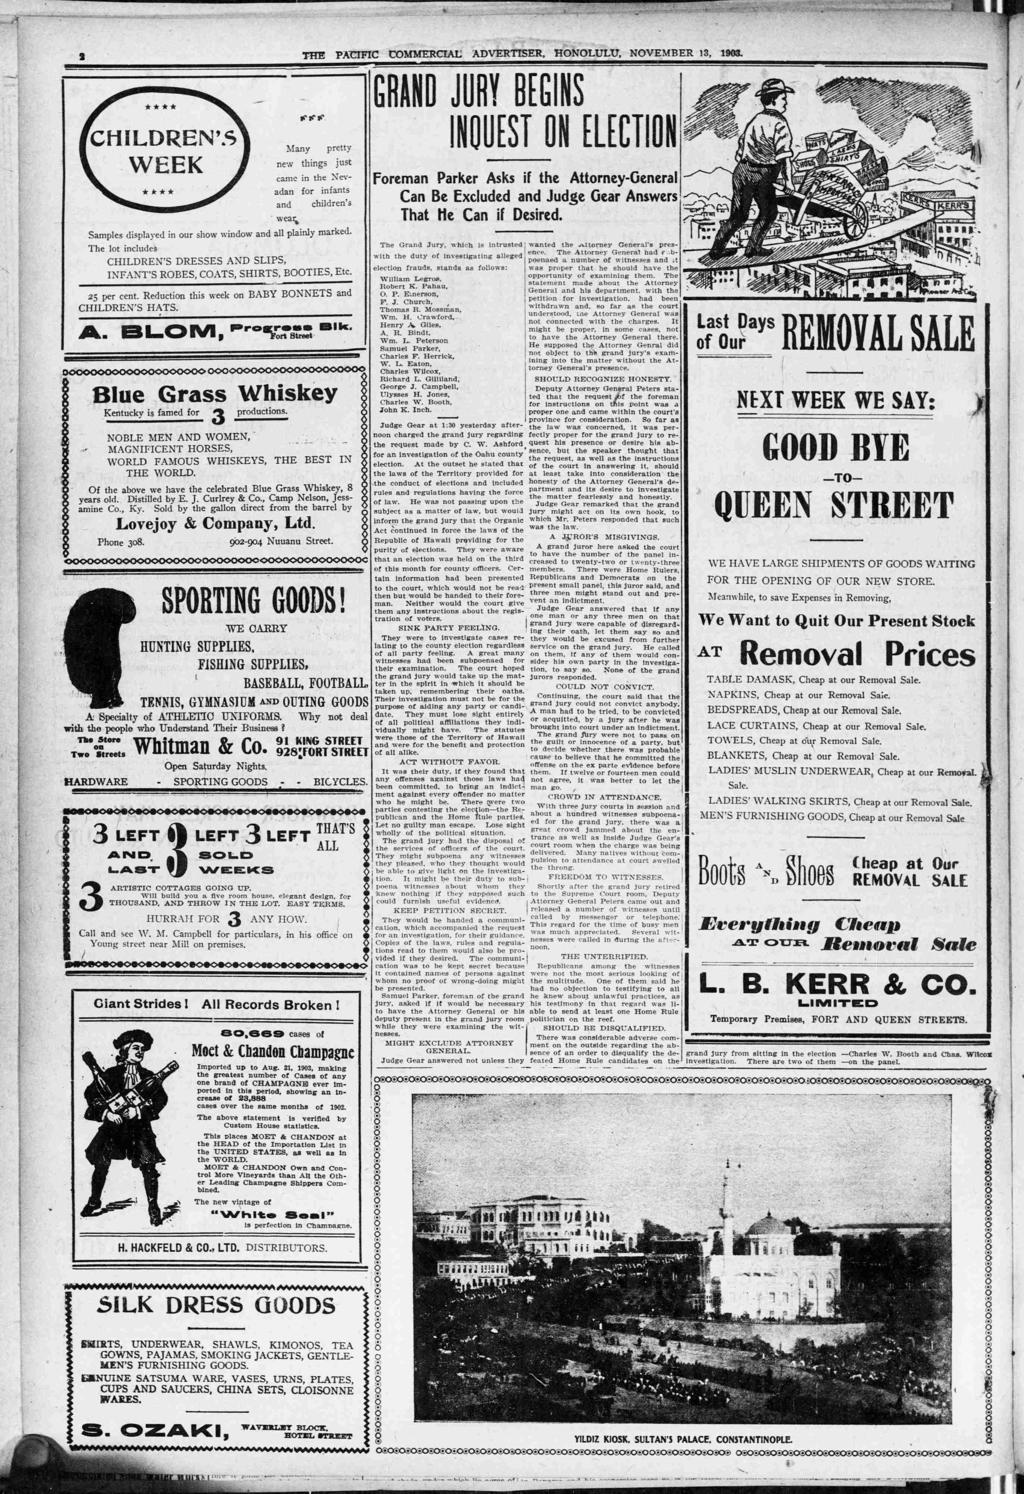 THE PACFC COMMERCAL ADVERTSER, HONOLULU, NOVEMBER 13, 1903. GRAND JURY BEGNS CHLDREN NOUEST ON ELECTON Many pretty new thngs ust WEEK Samples dsplayed n our show wndow and all planly marked.